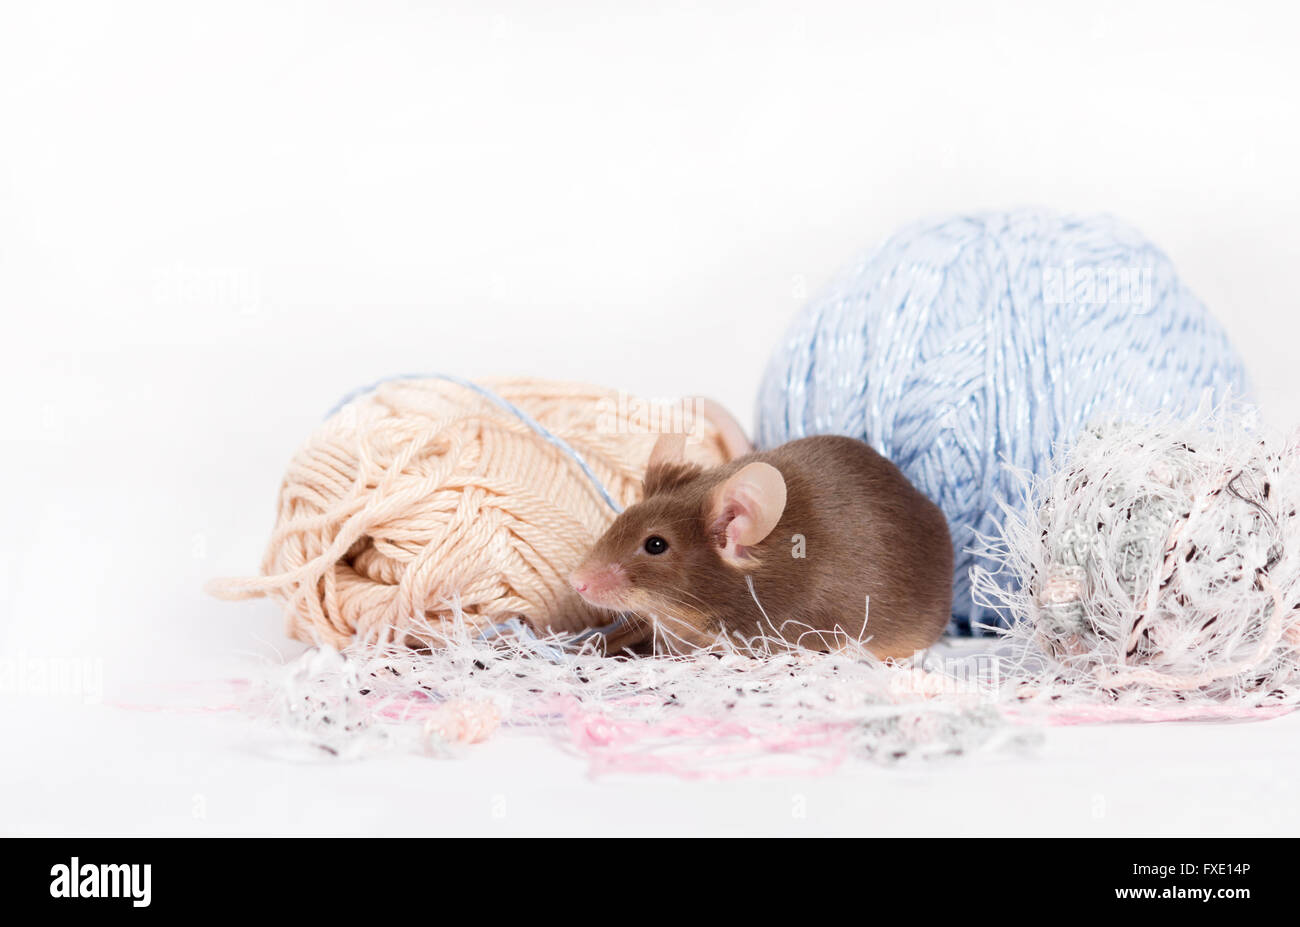 Funny domestic mouse is hiding among tangles of yarn. Yarn is blue, beige, pink and fluffy. Mouse has bushy wiskers. Mouse is fu Stock Photo